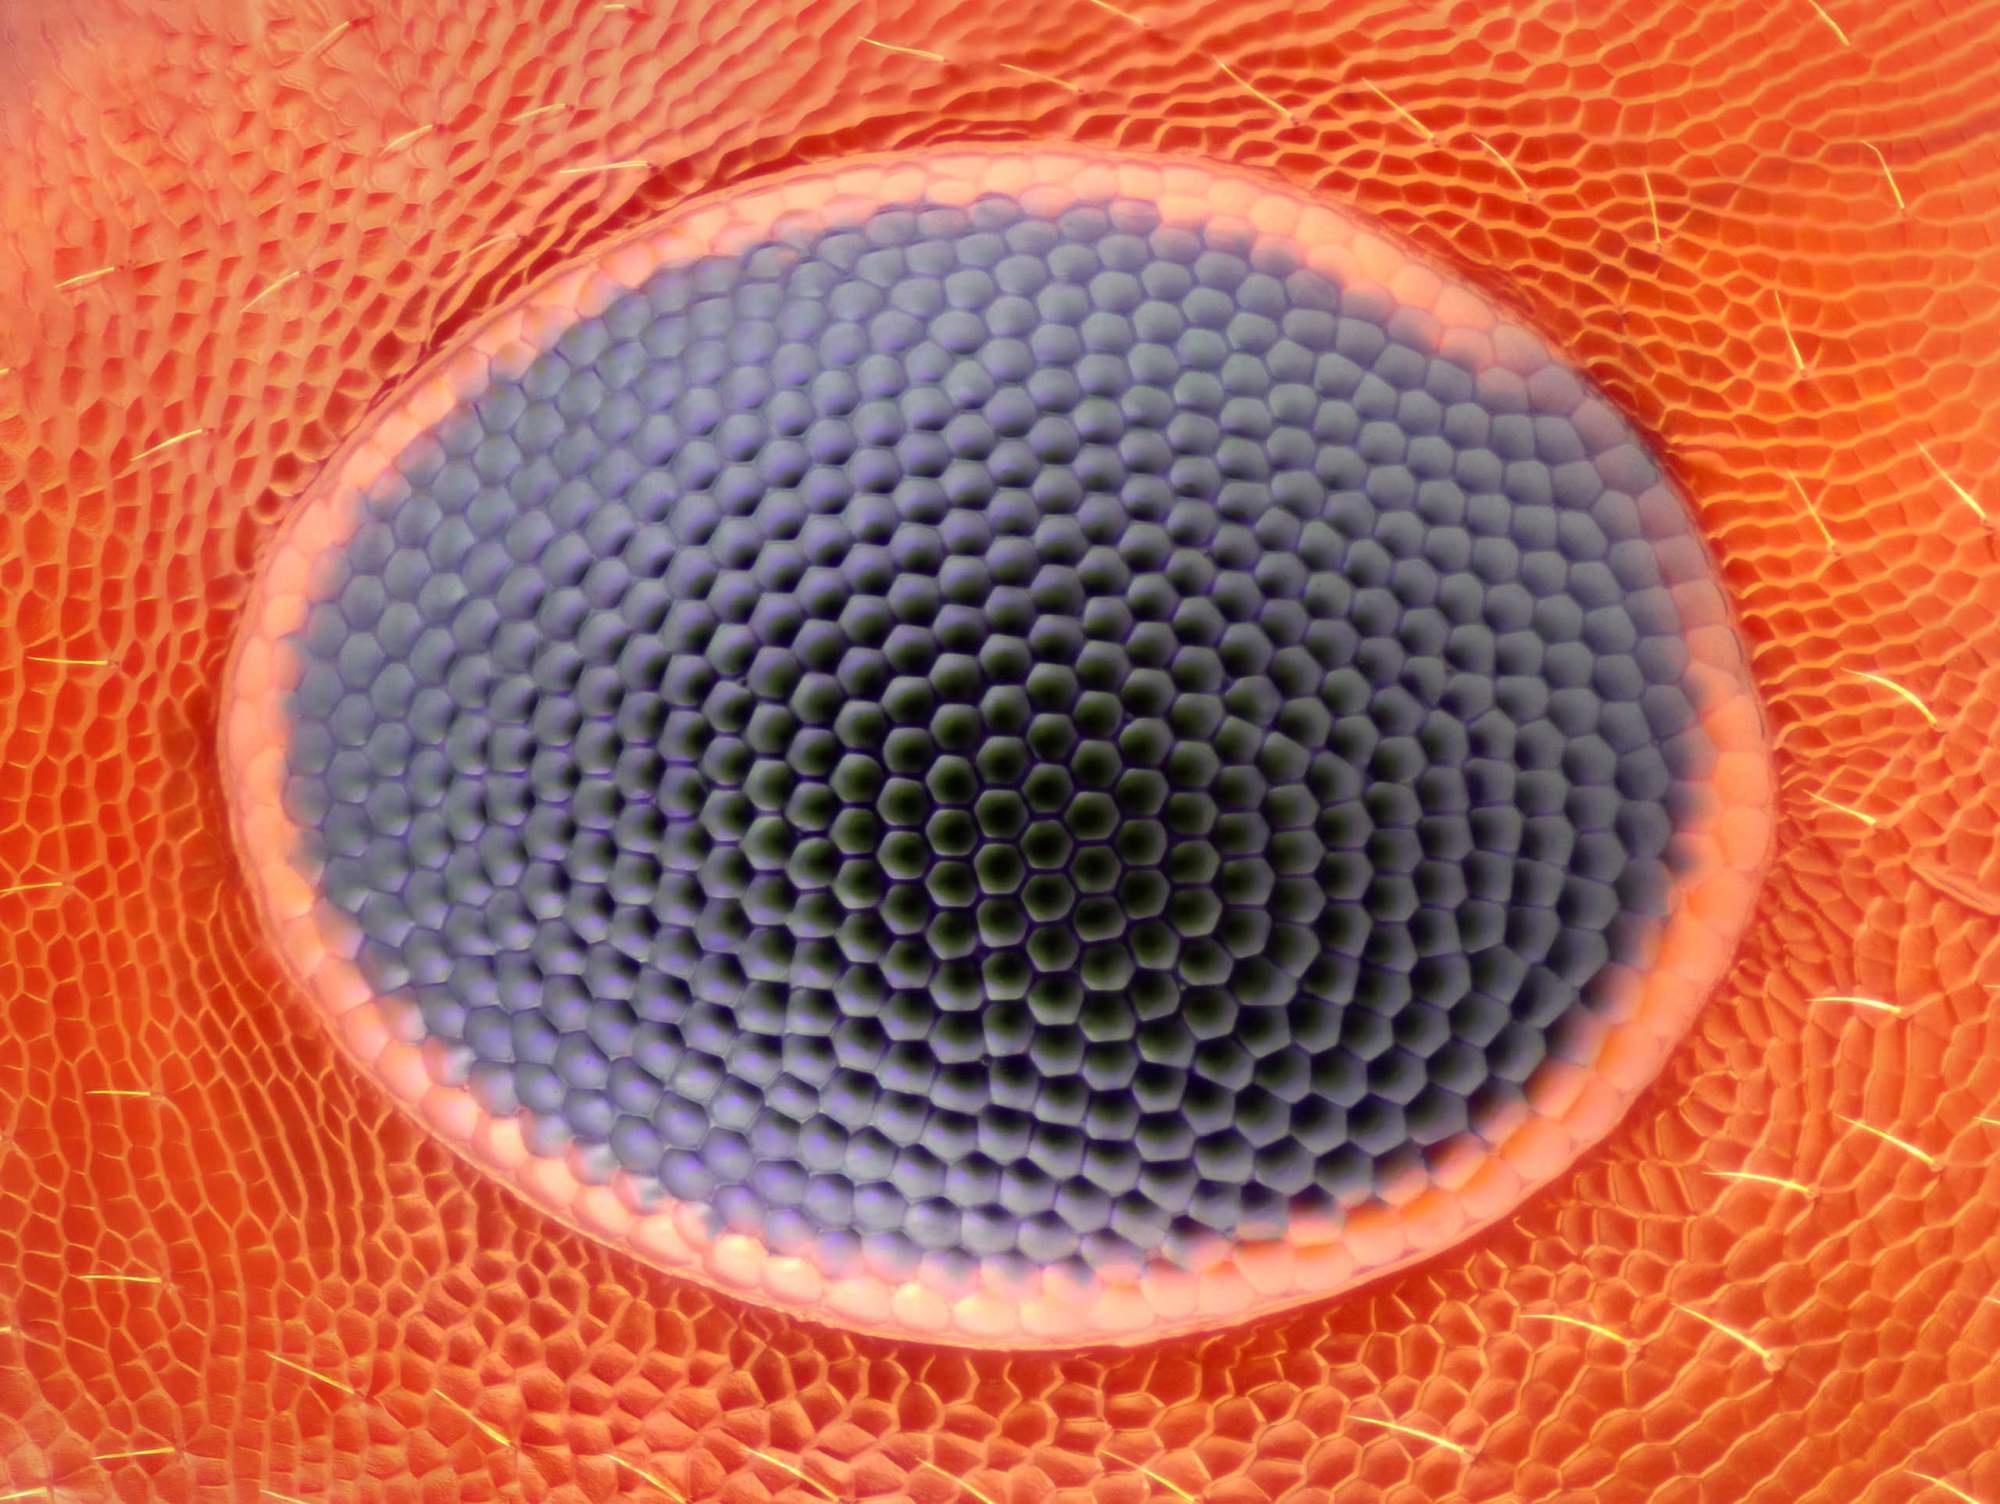 This is what an ant's eye looks like at 20x magnification.